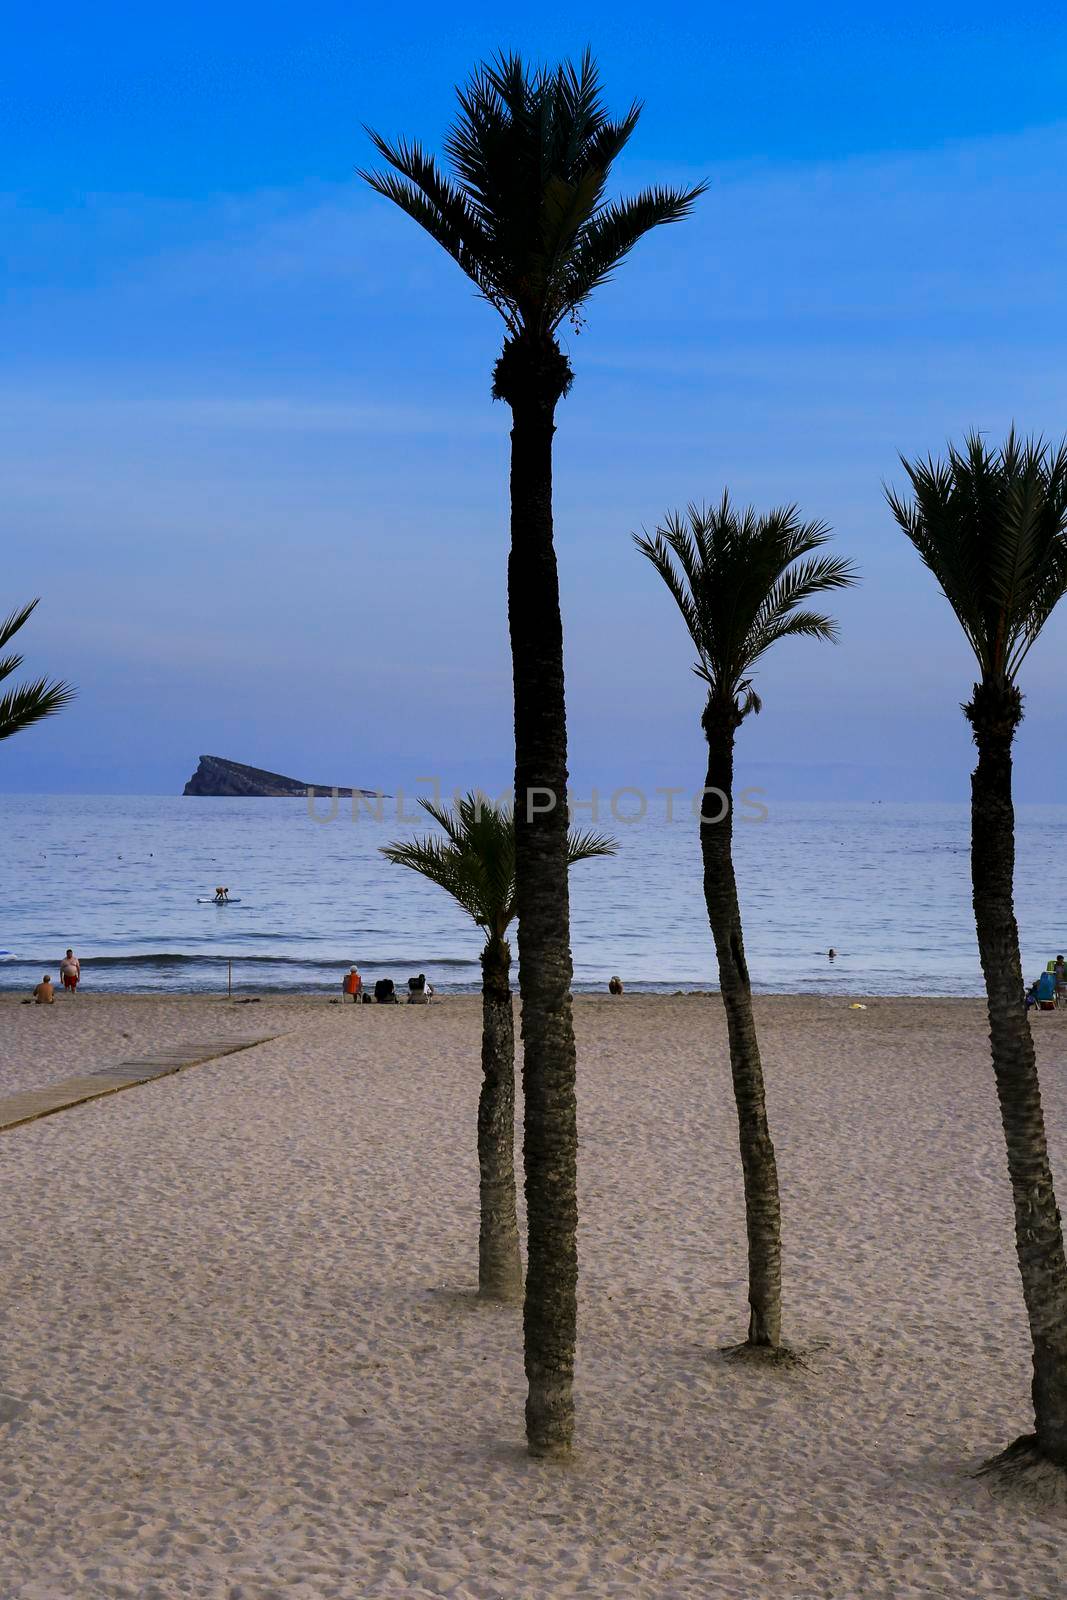 Beautiful Poniente beach with palm trees in Benidorm by soniabonet